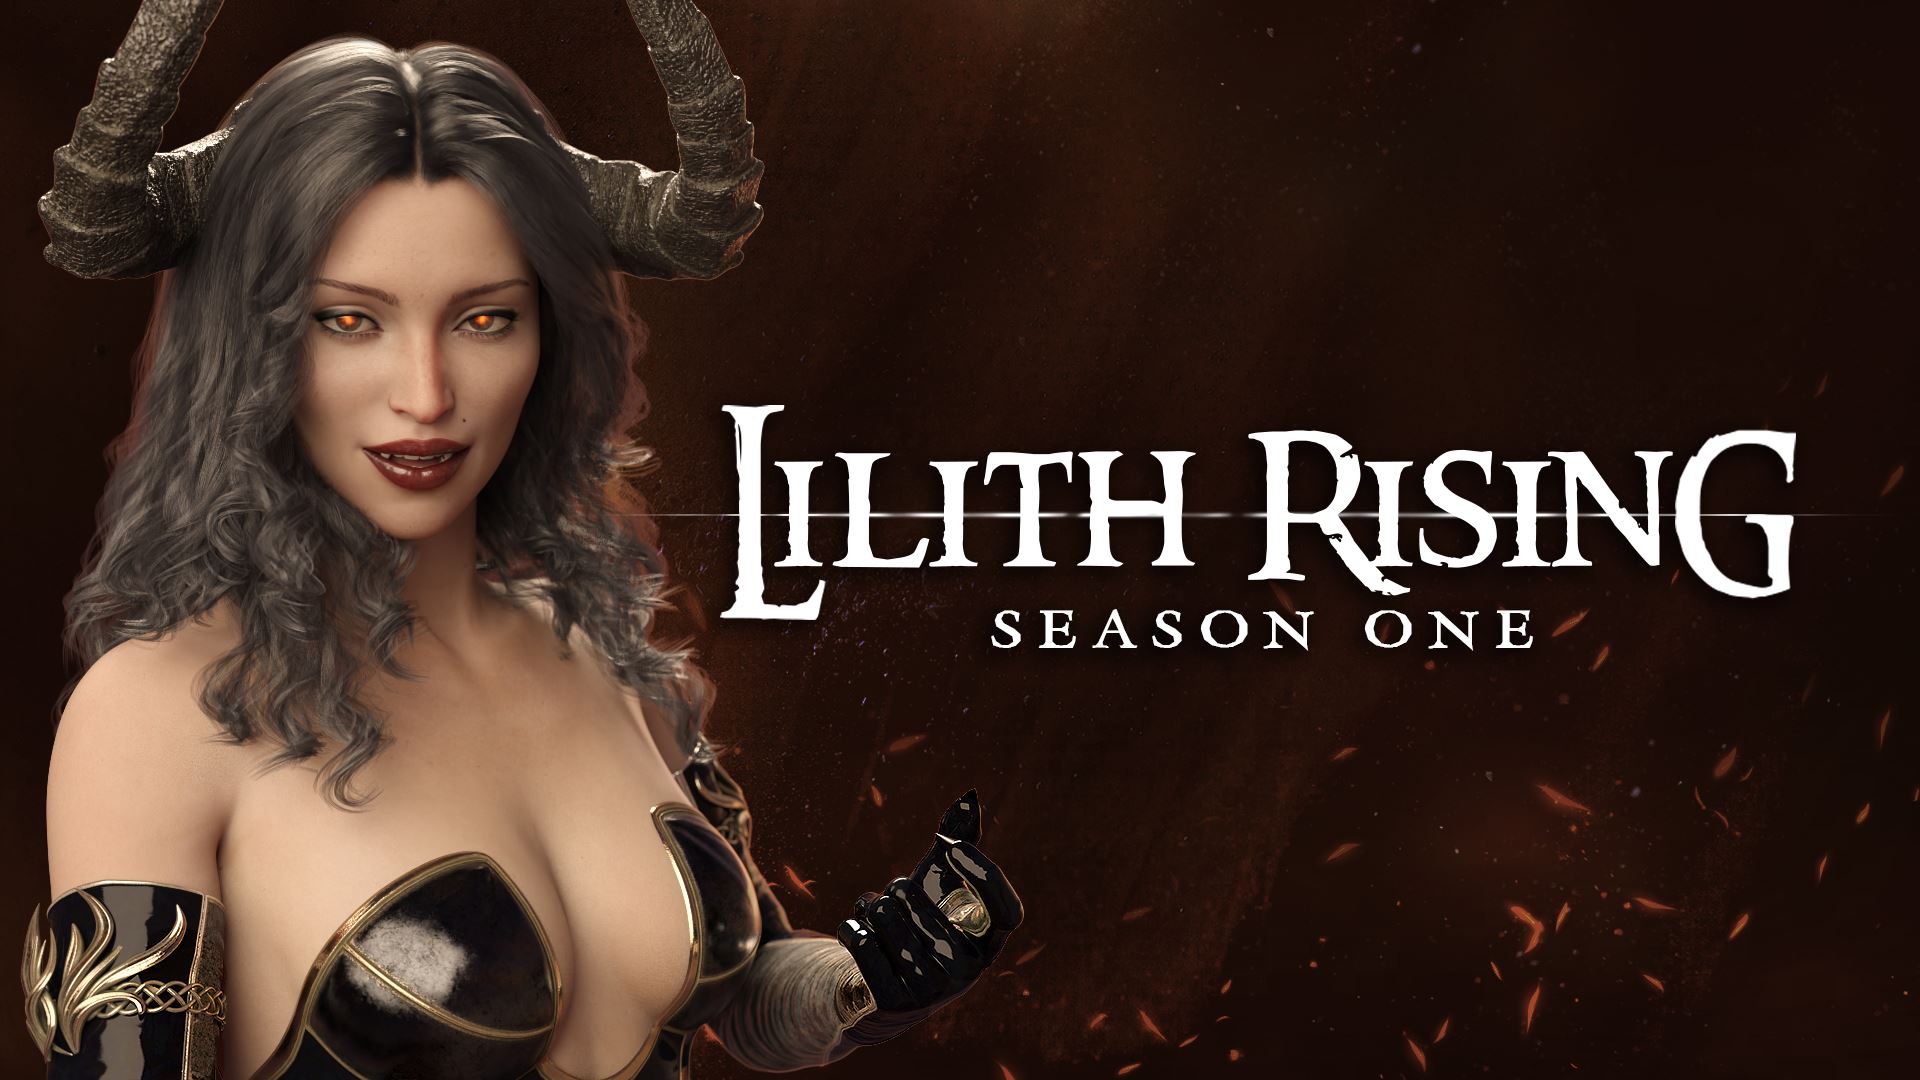 Lilith Rising porn xxx game download cover